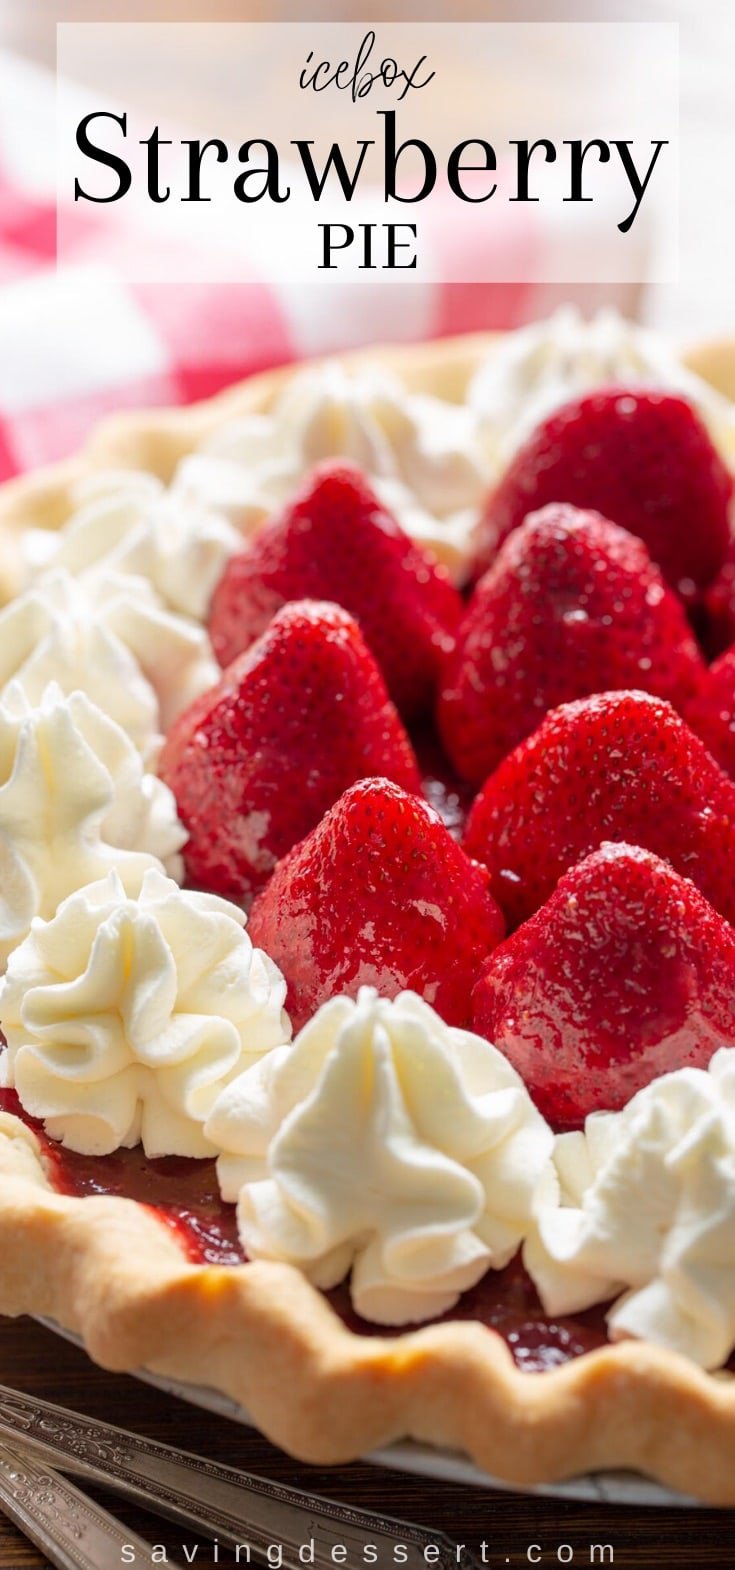 A strawberry pie with whole berries on top garnished with whipped cream